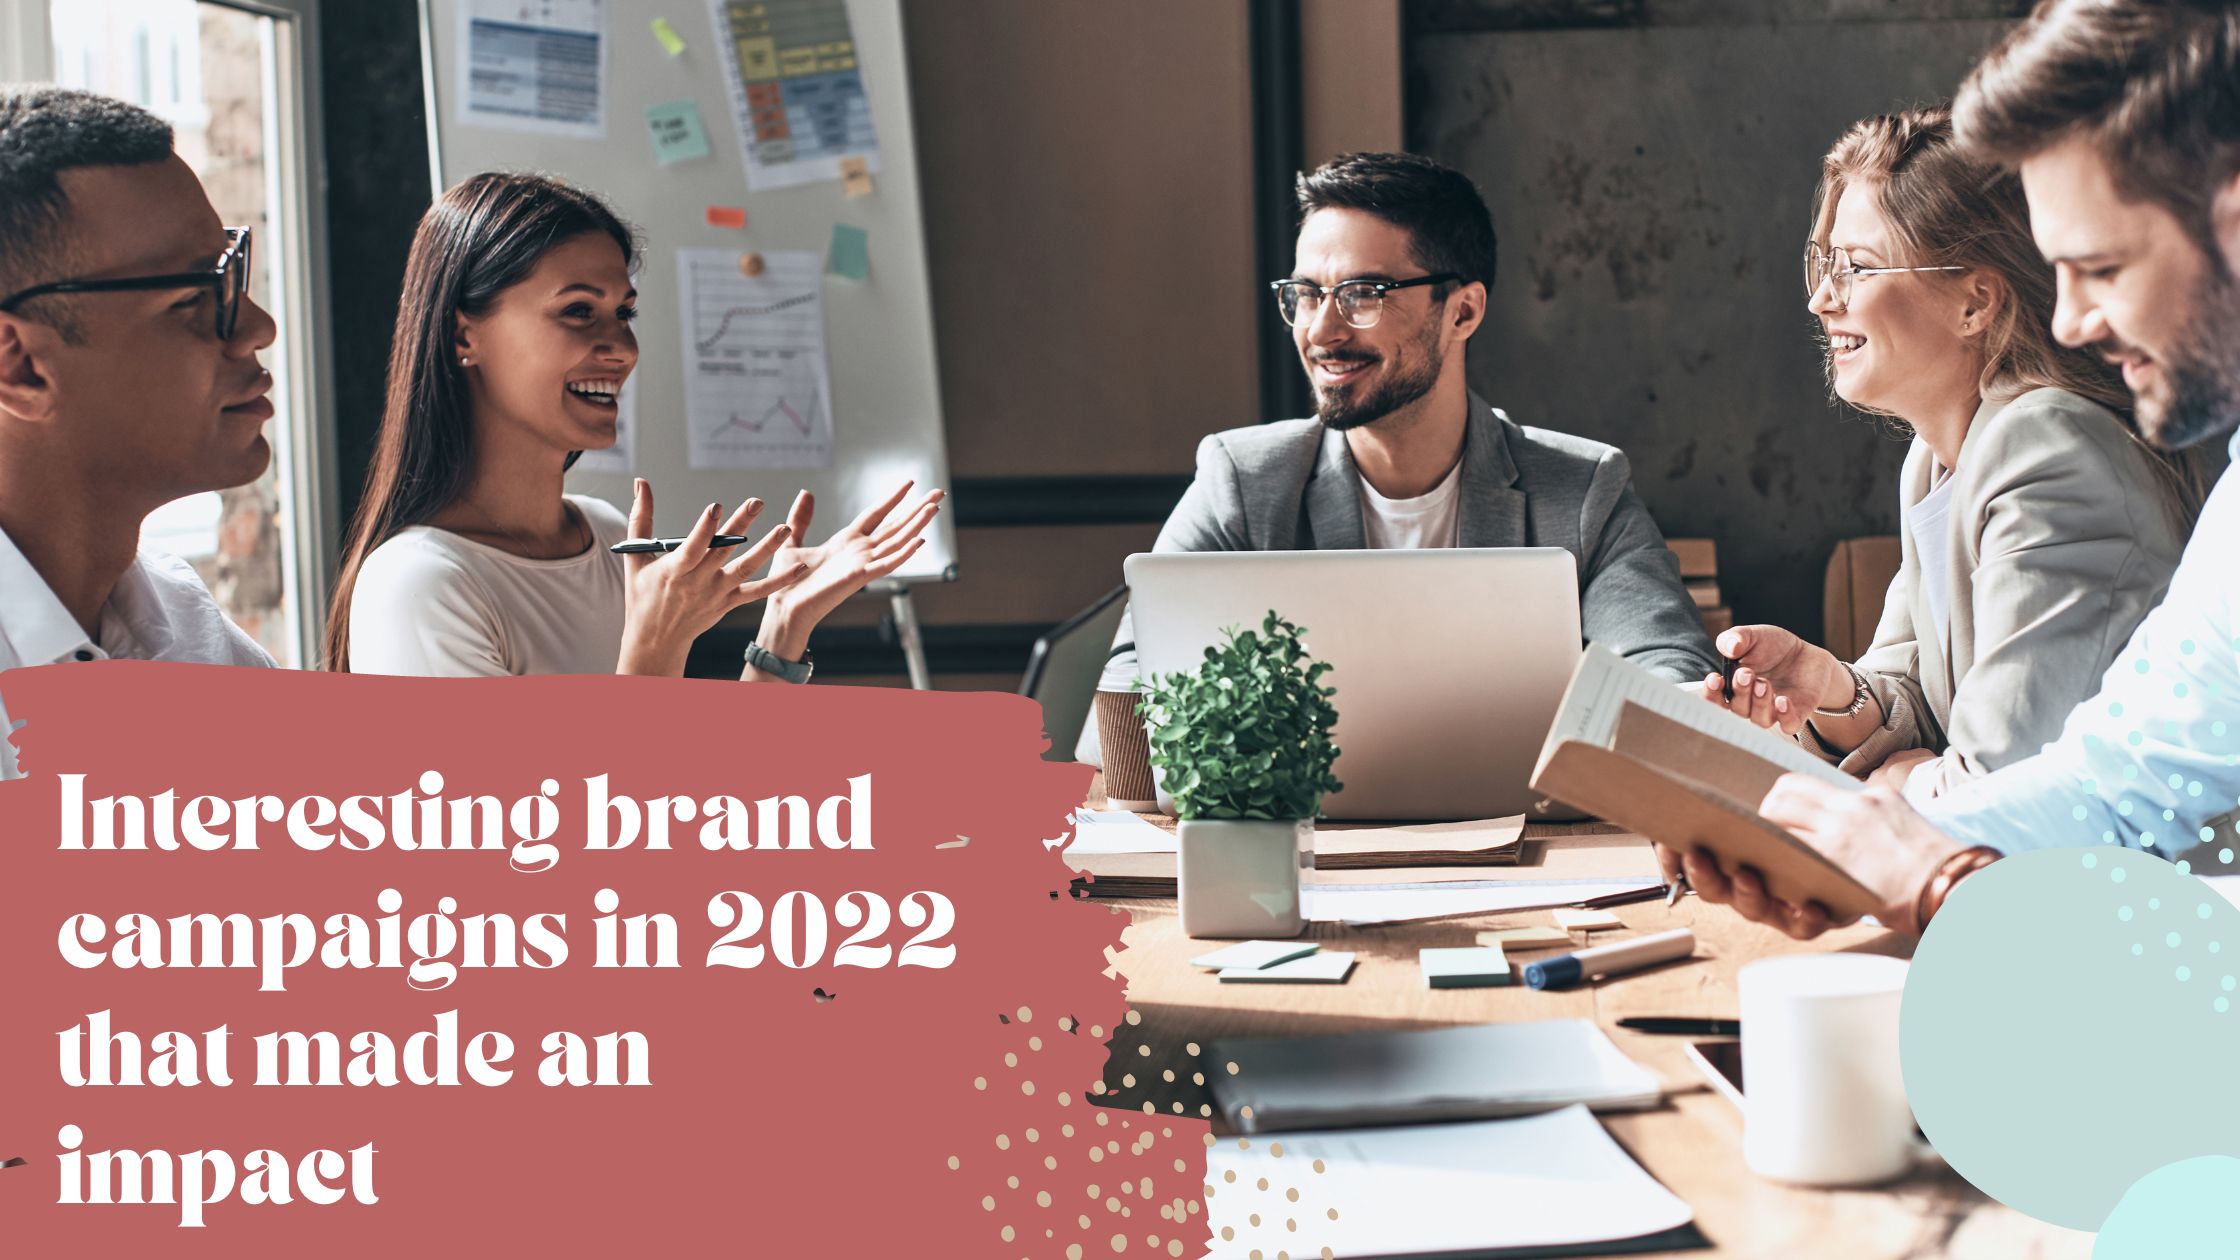 Interesting brand campaigns in 2022 that made an impact